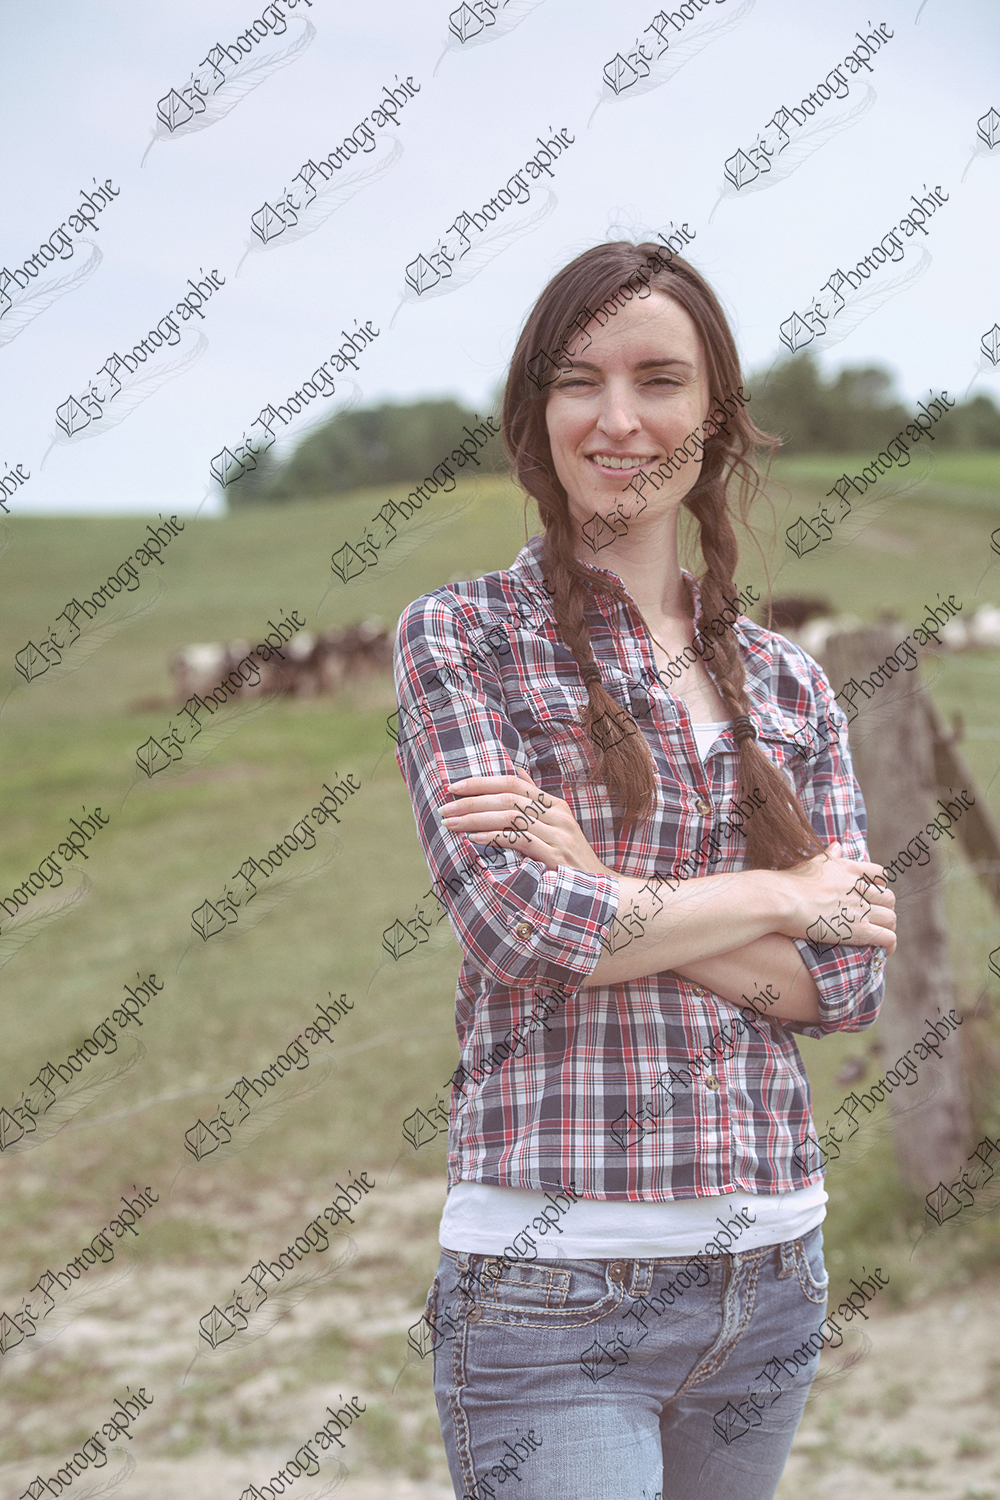 elze_photo_9252_eleveuse_sourire_pacage_happy_young_woman_posing